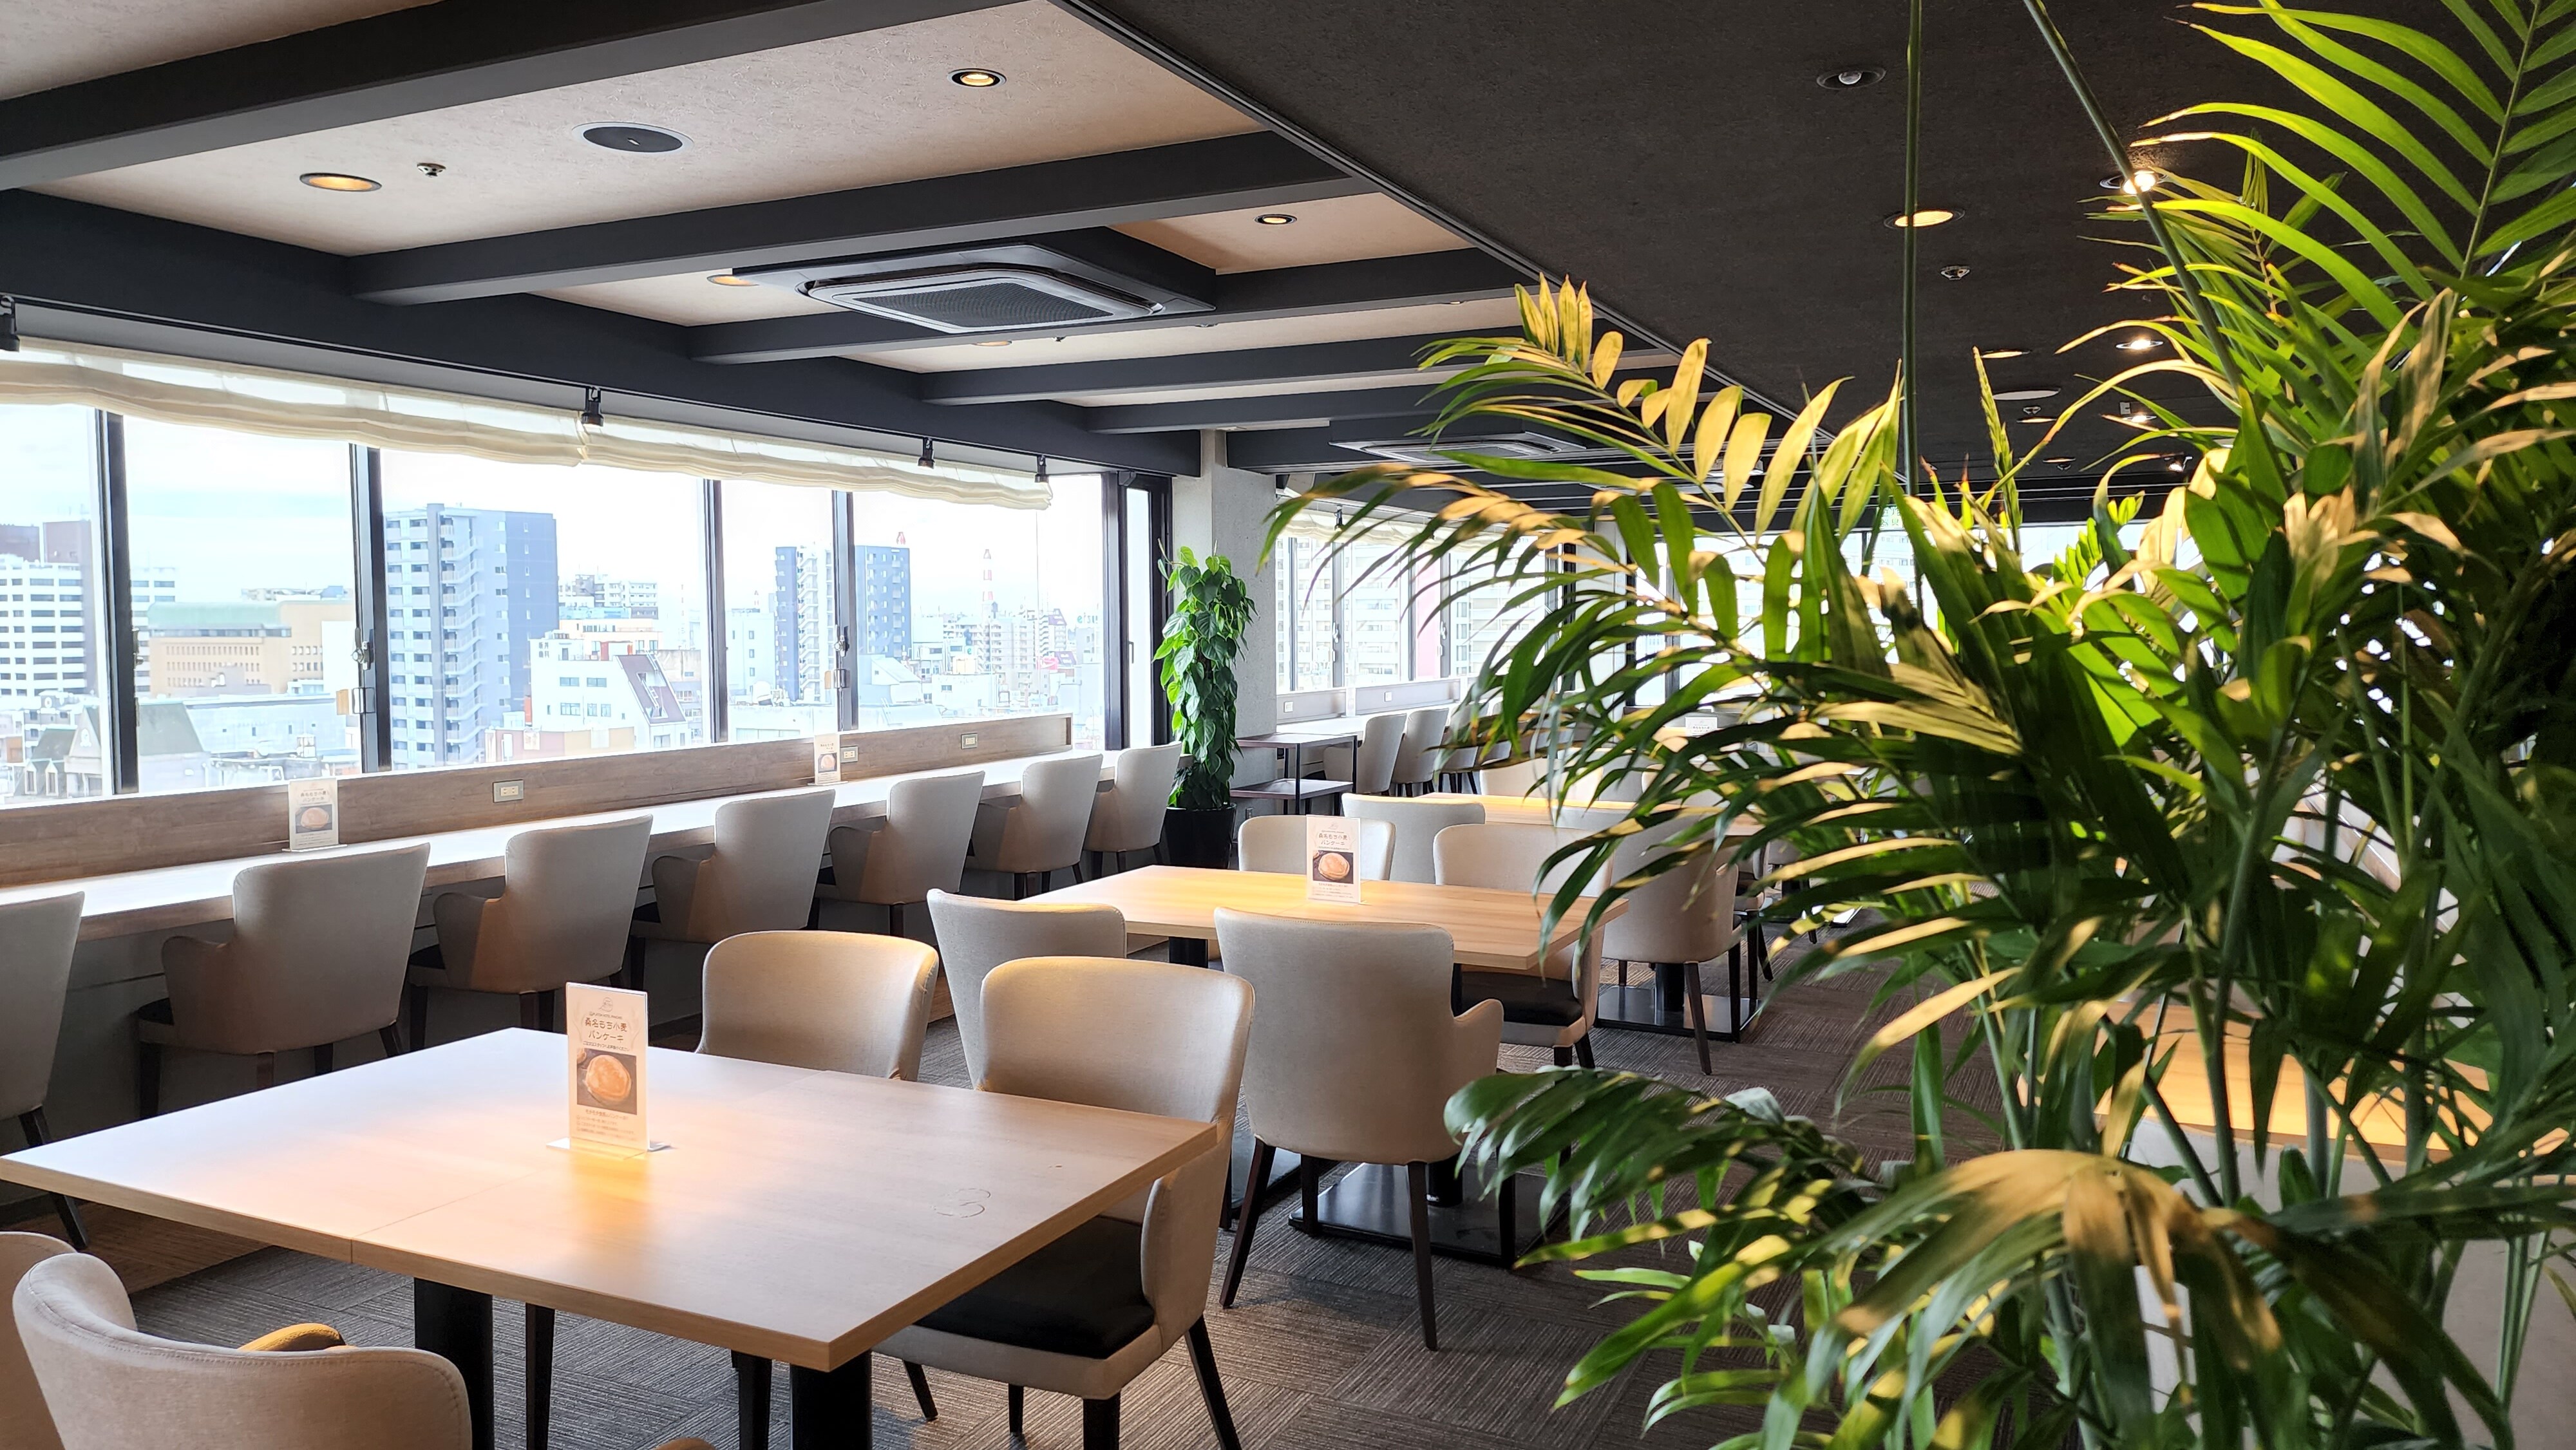 ◆The 10th floor "Sky Garden" can be used as a coworking space from 10:00 to 18:00.